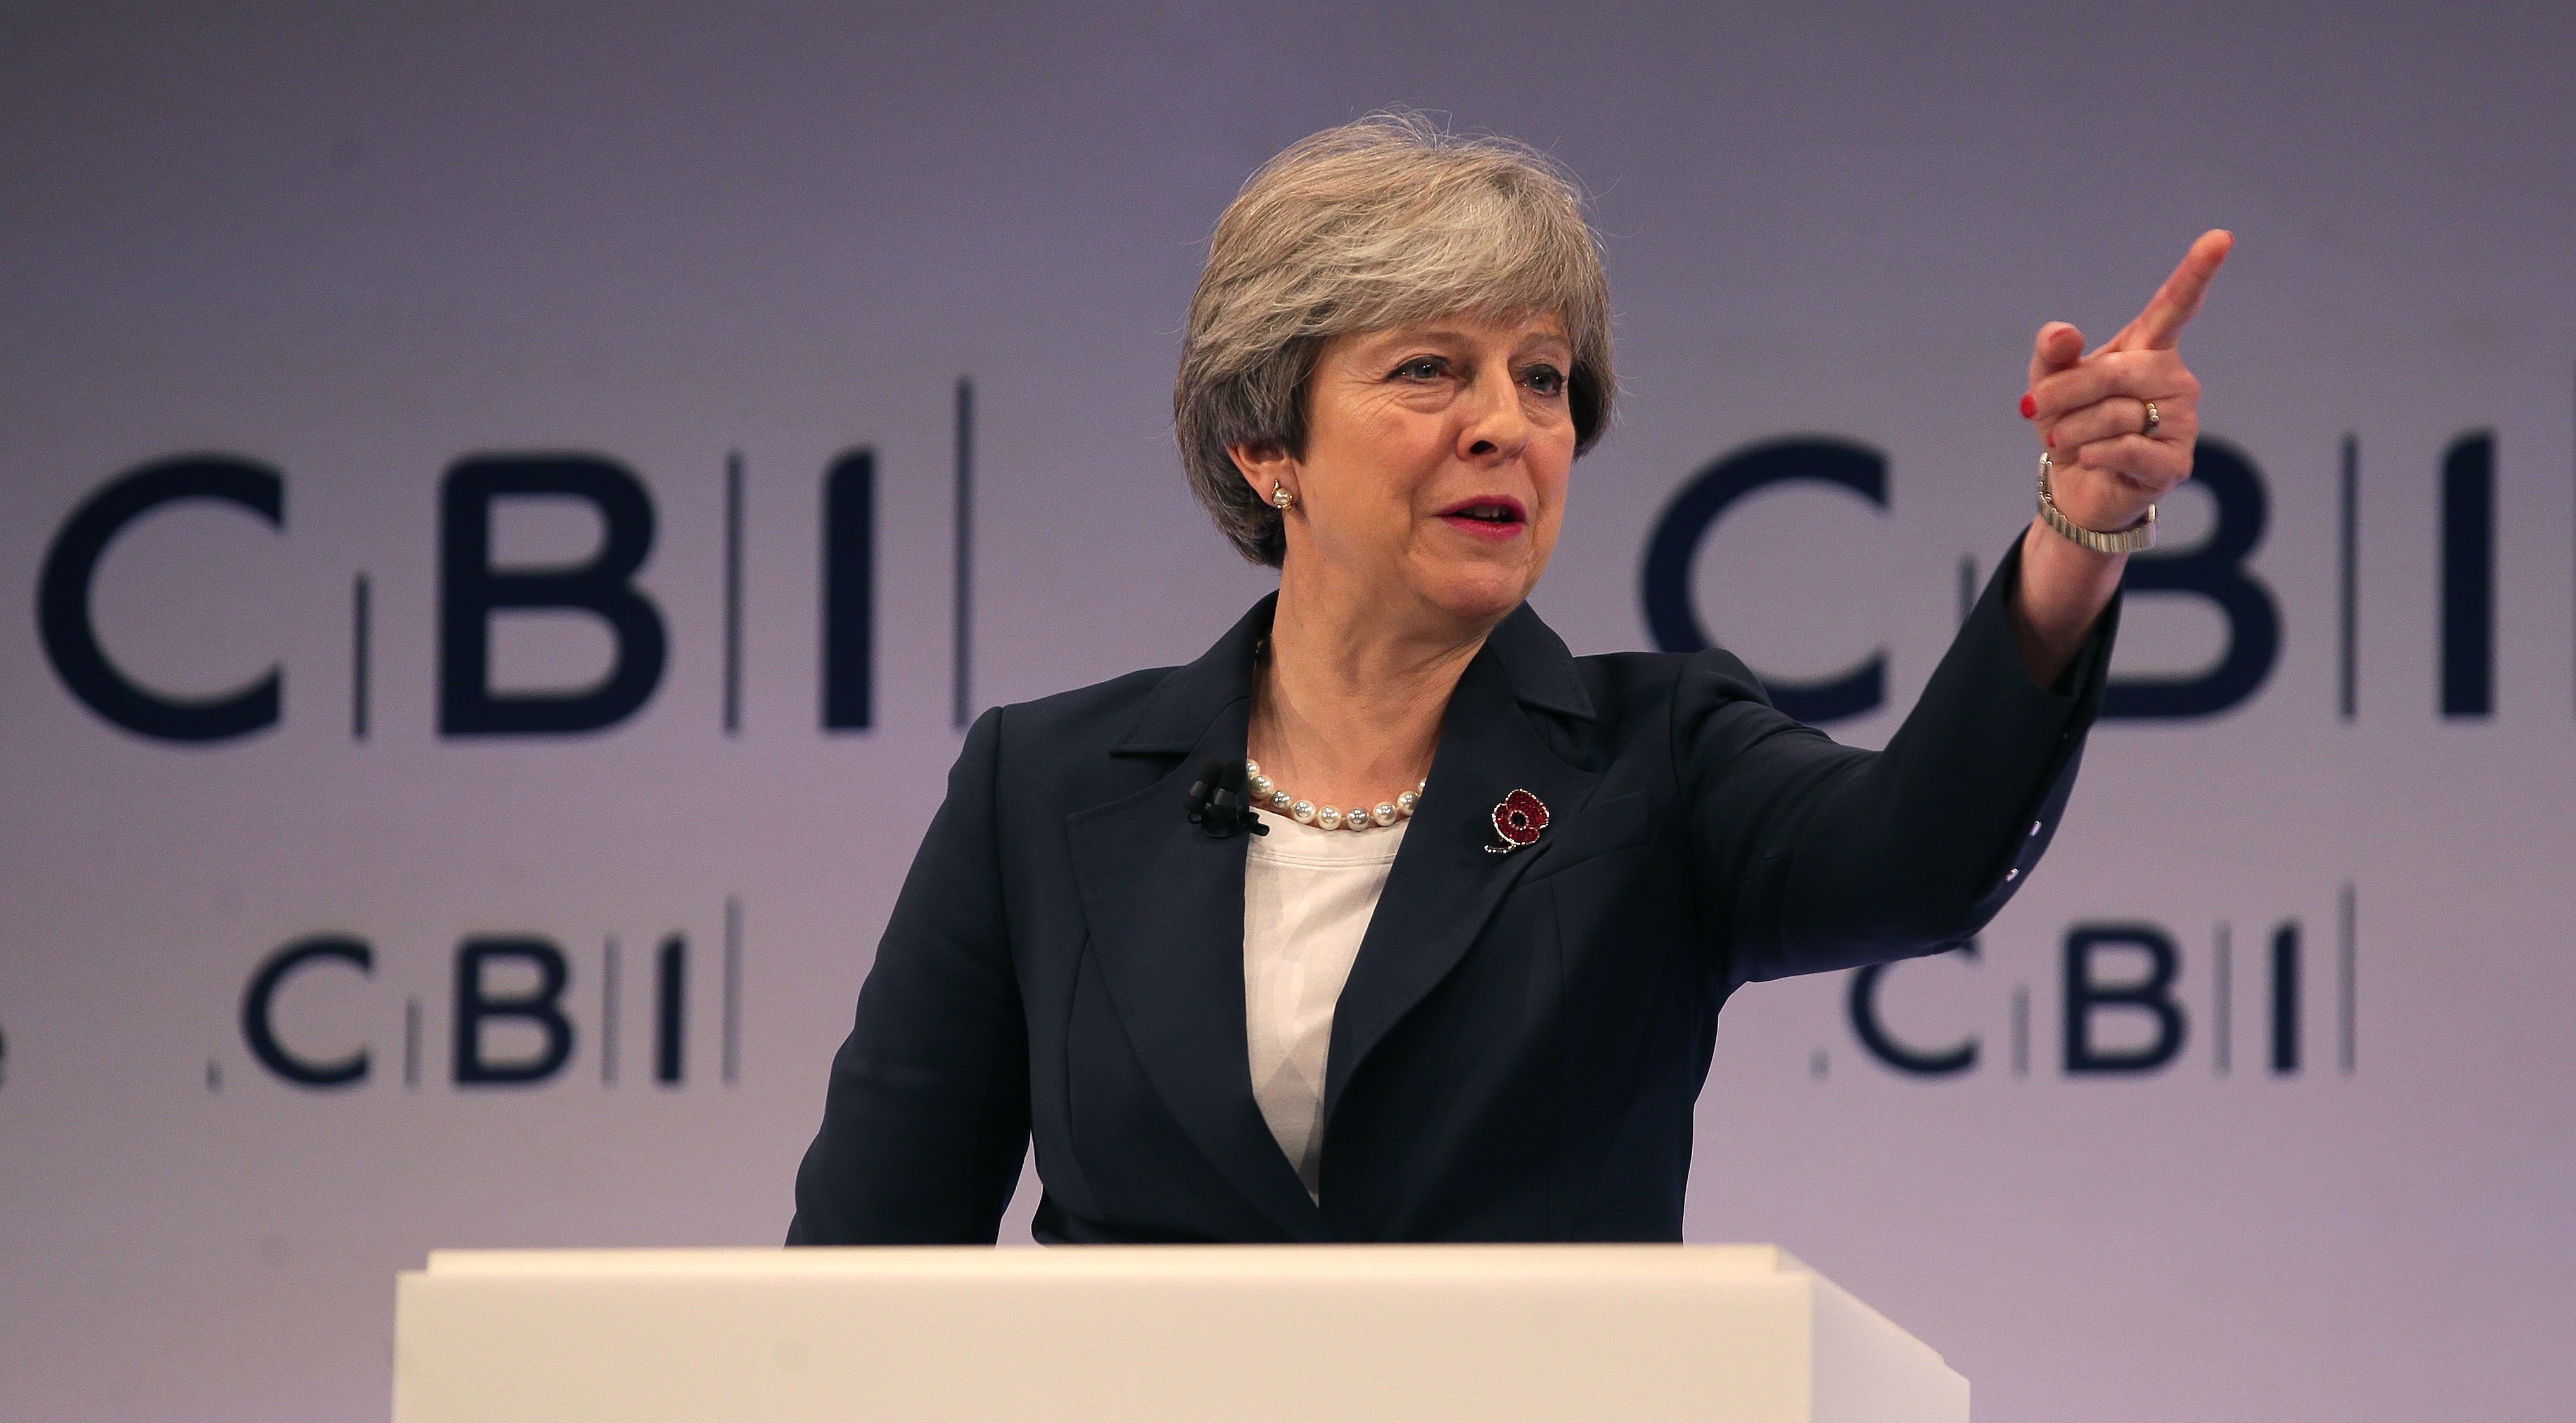 <i>Theresa May addresses delegates at the annual Confederation of British Industry (CBI) conference in east London, on November 6, 2017.&nbsp;</i>